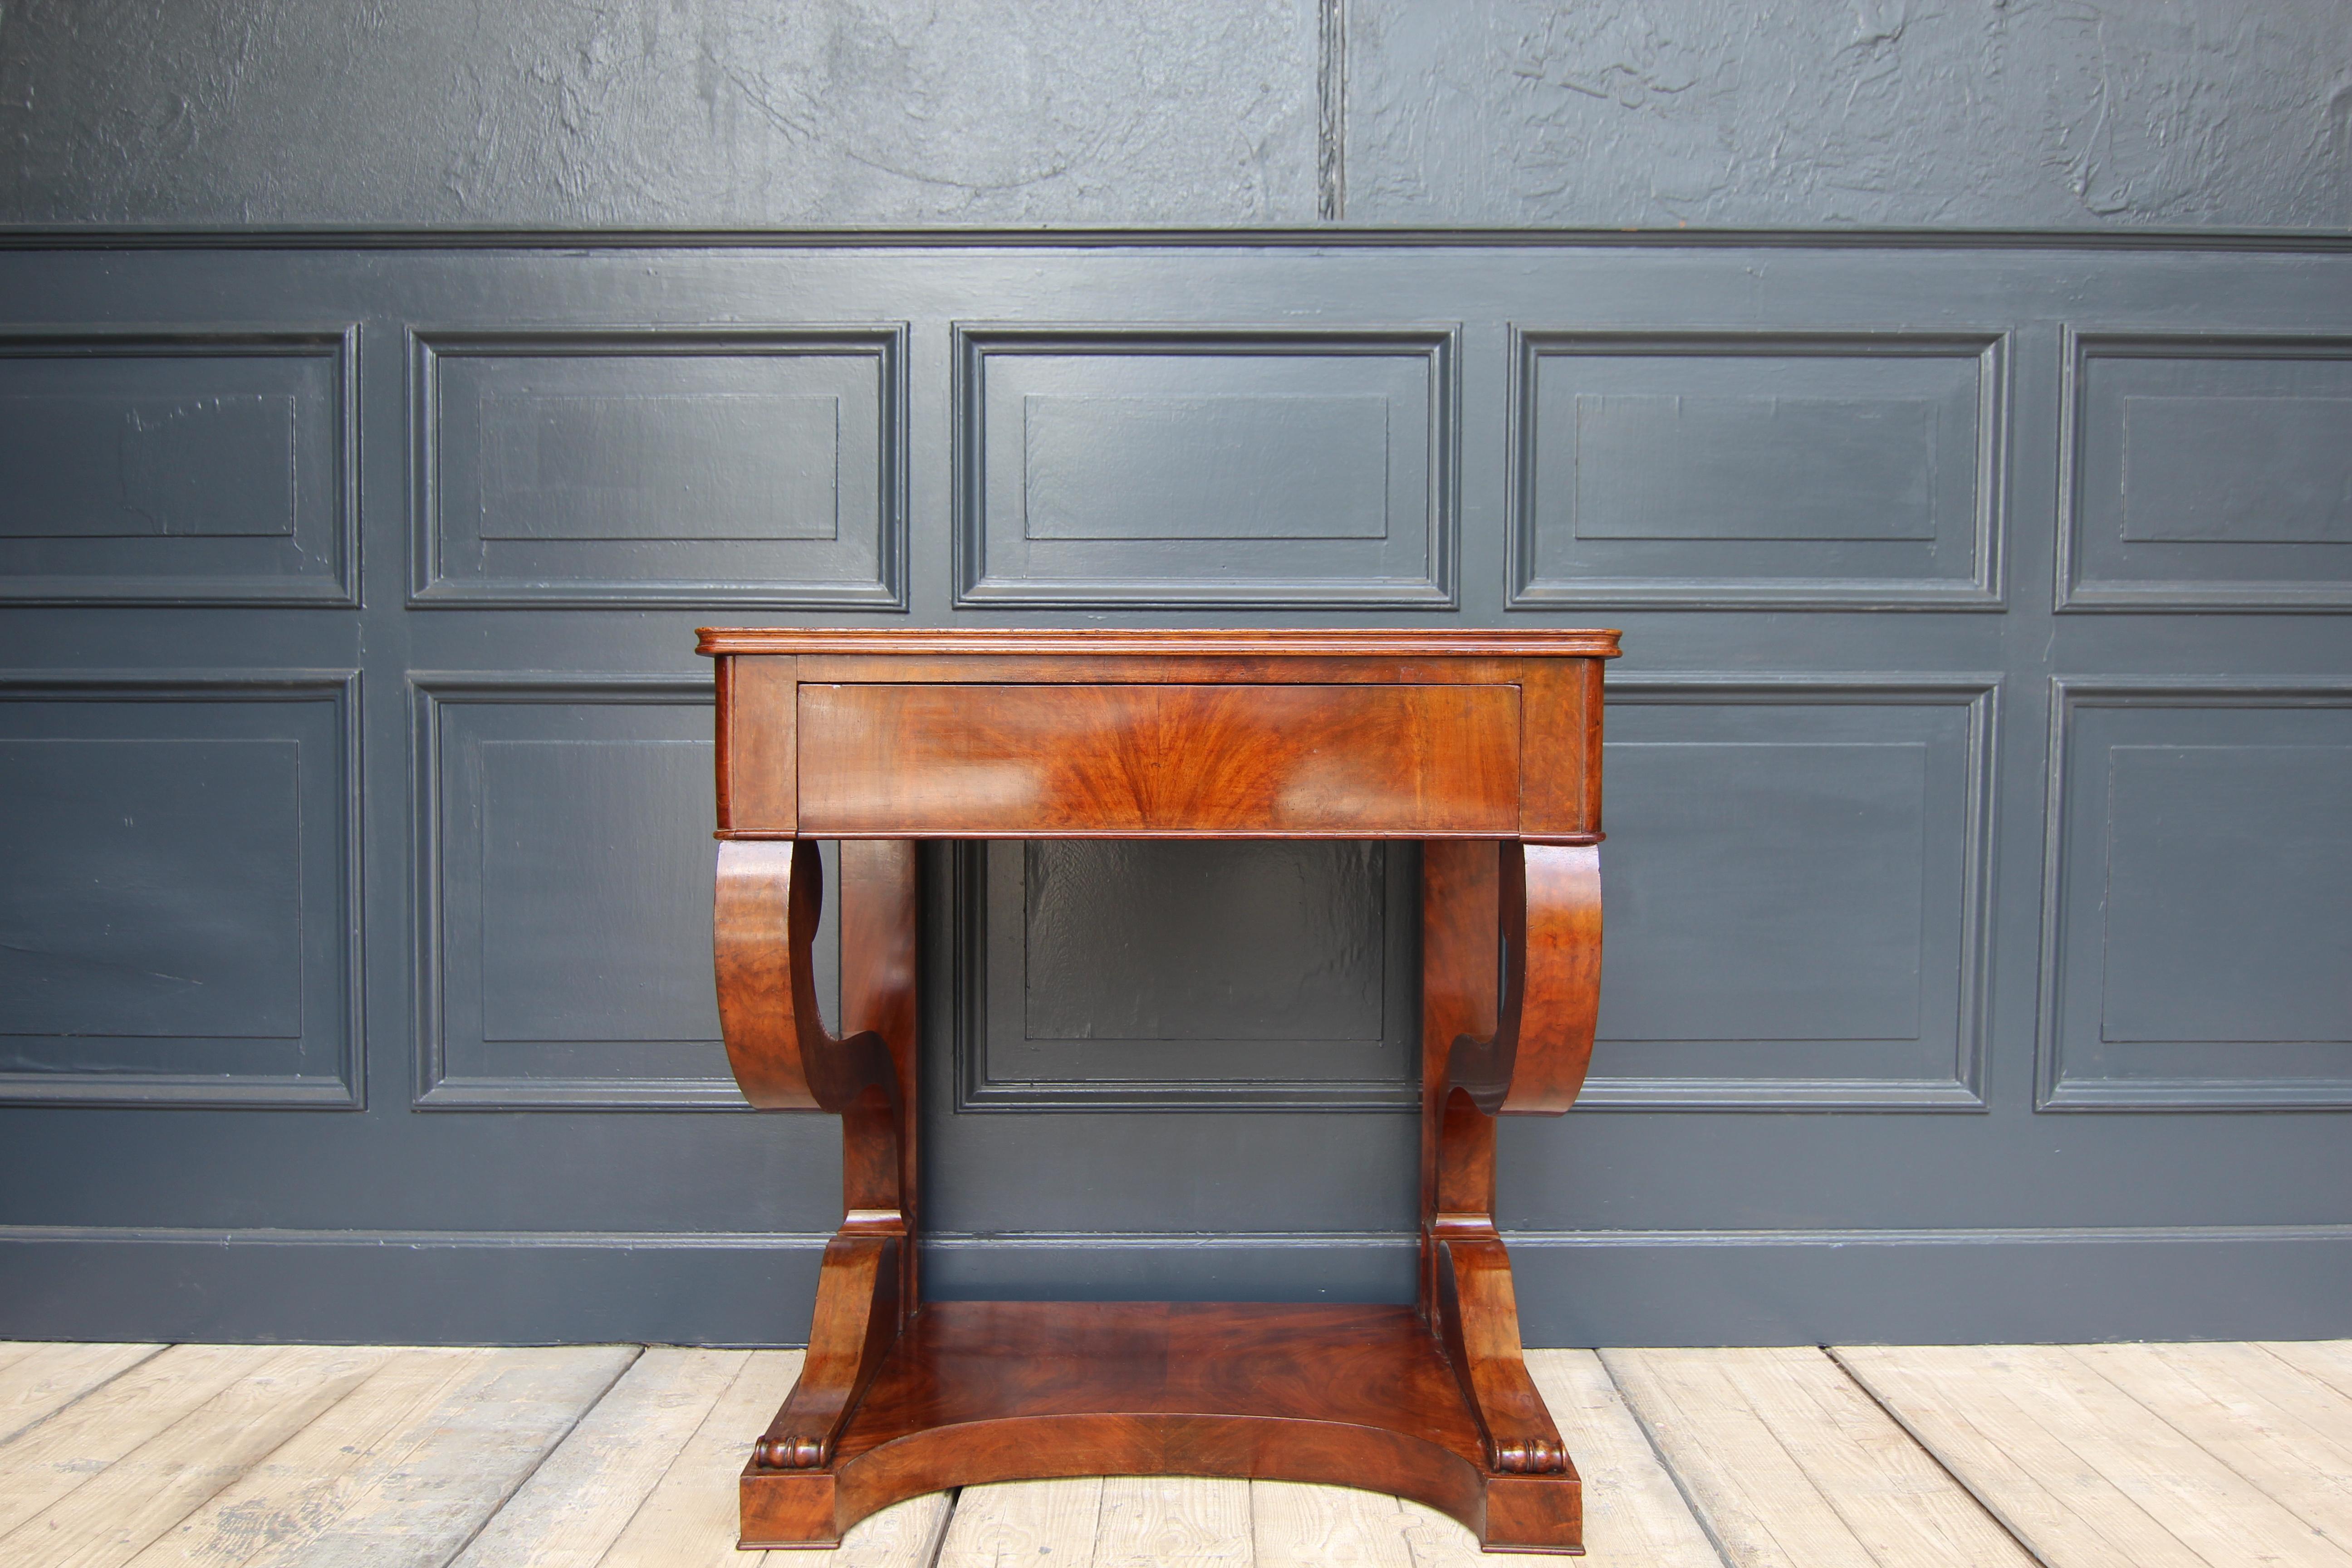 A small 19th century mahogany console or wall table.

Solid mahogany and veneered.

Curved pilasters on a plinth support the simple frame with a drawer sans traverse and a slightly overhanging profiled top.

Dimensions: 
81 cm high / 31.9